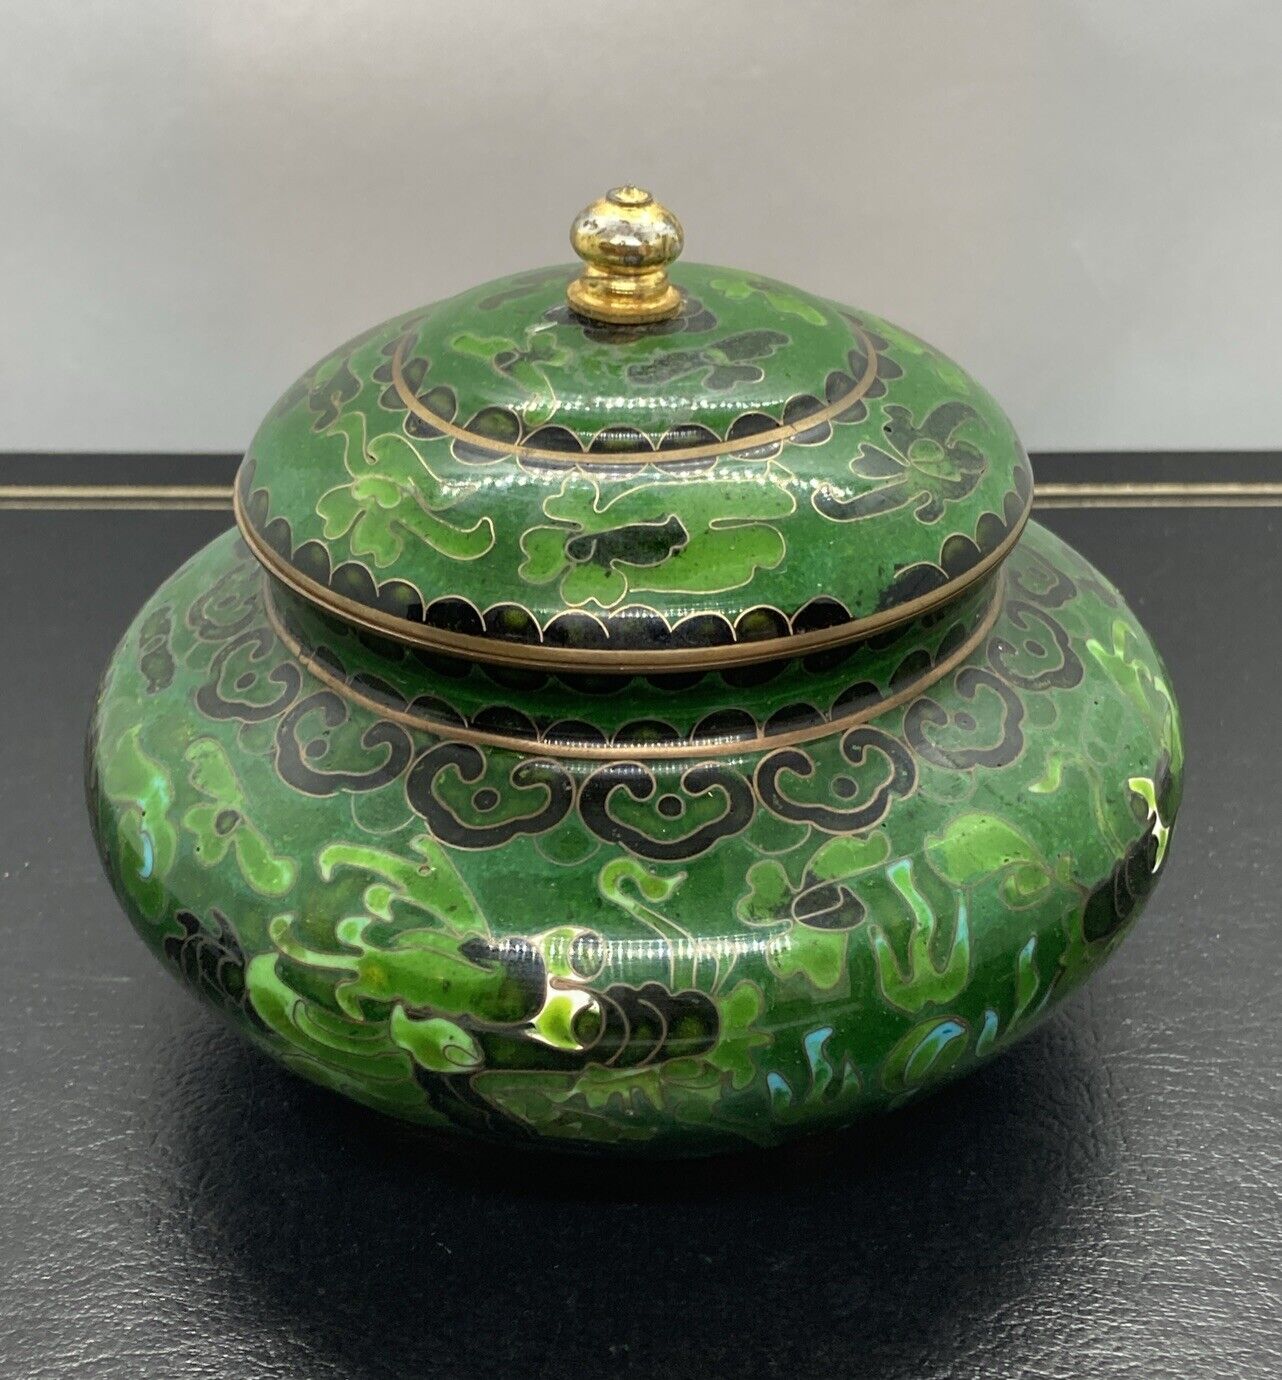 VINTAGE SHADES OF GREEN CHINESE CLOISONNE COVERED DISH 5” In Diameter